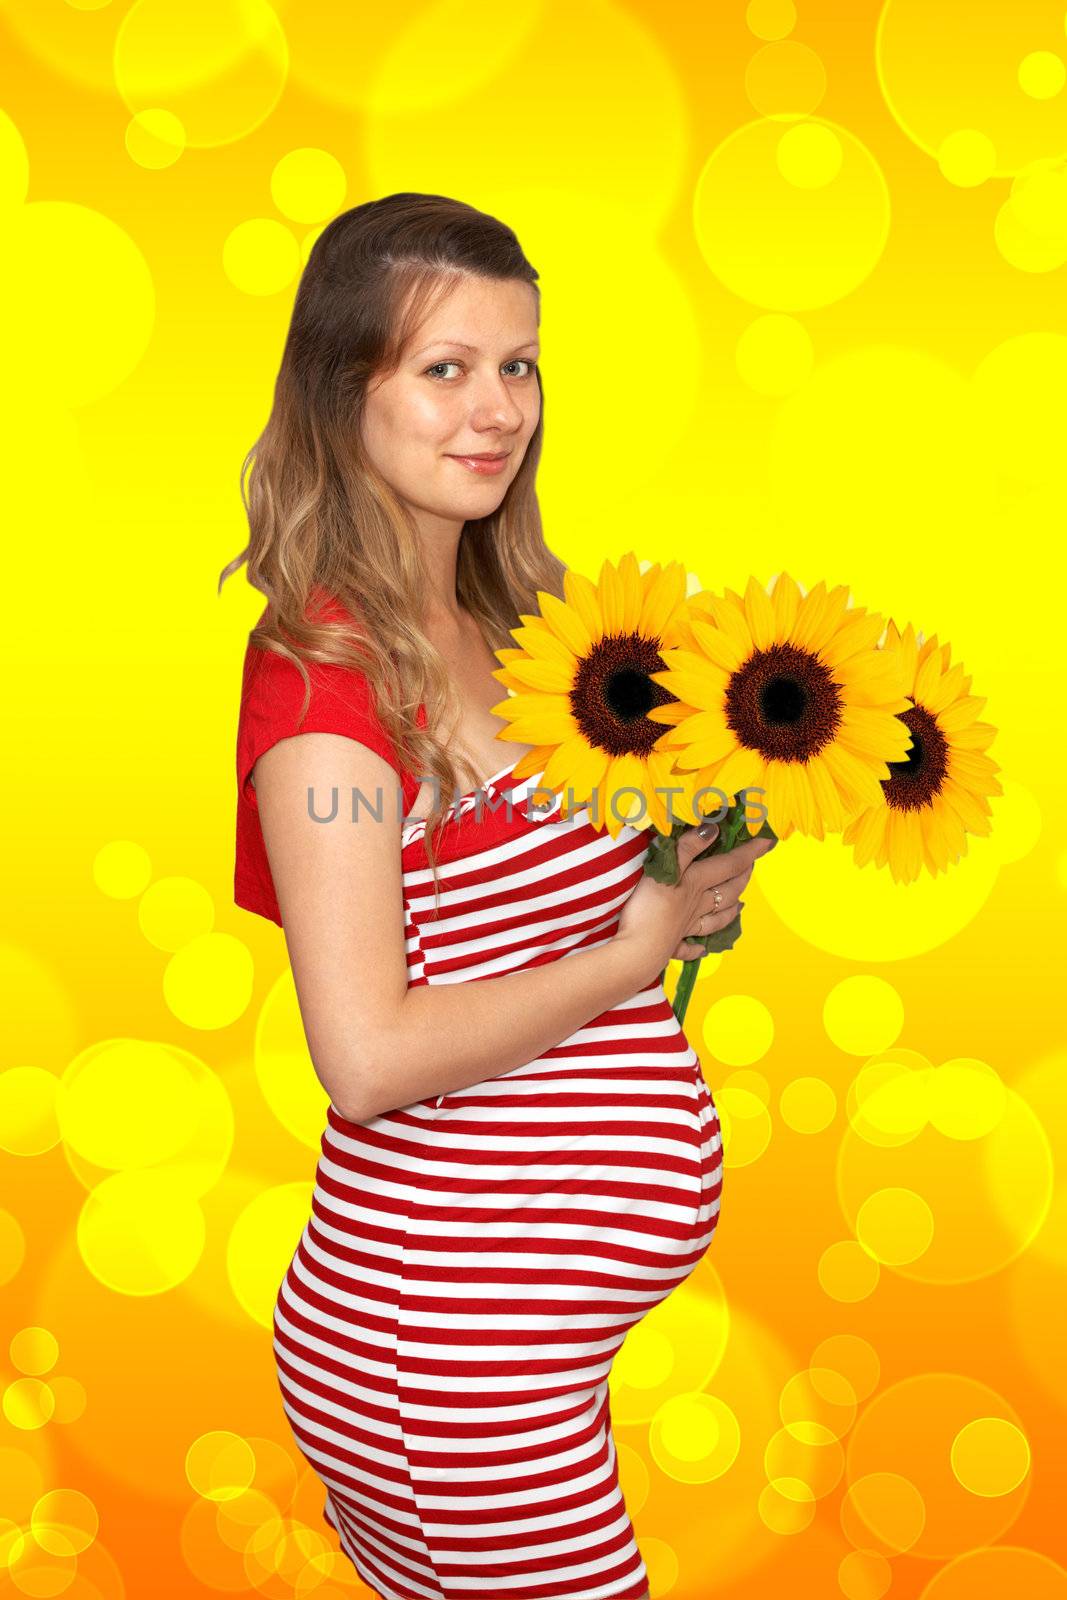 The pregnant woman and sunflower by petrkurgan